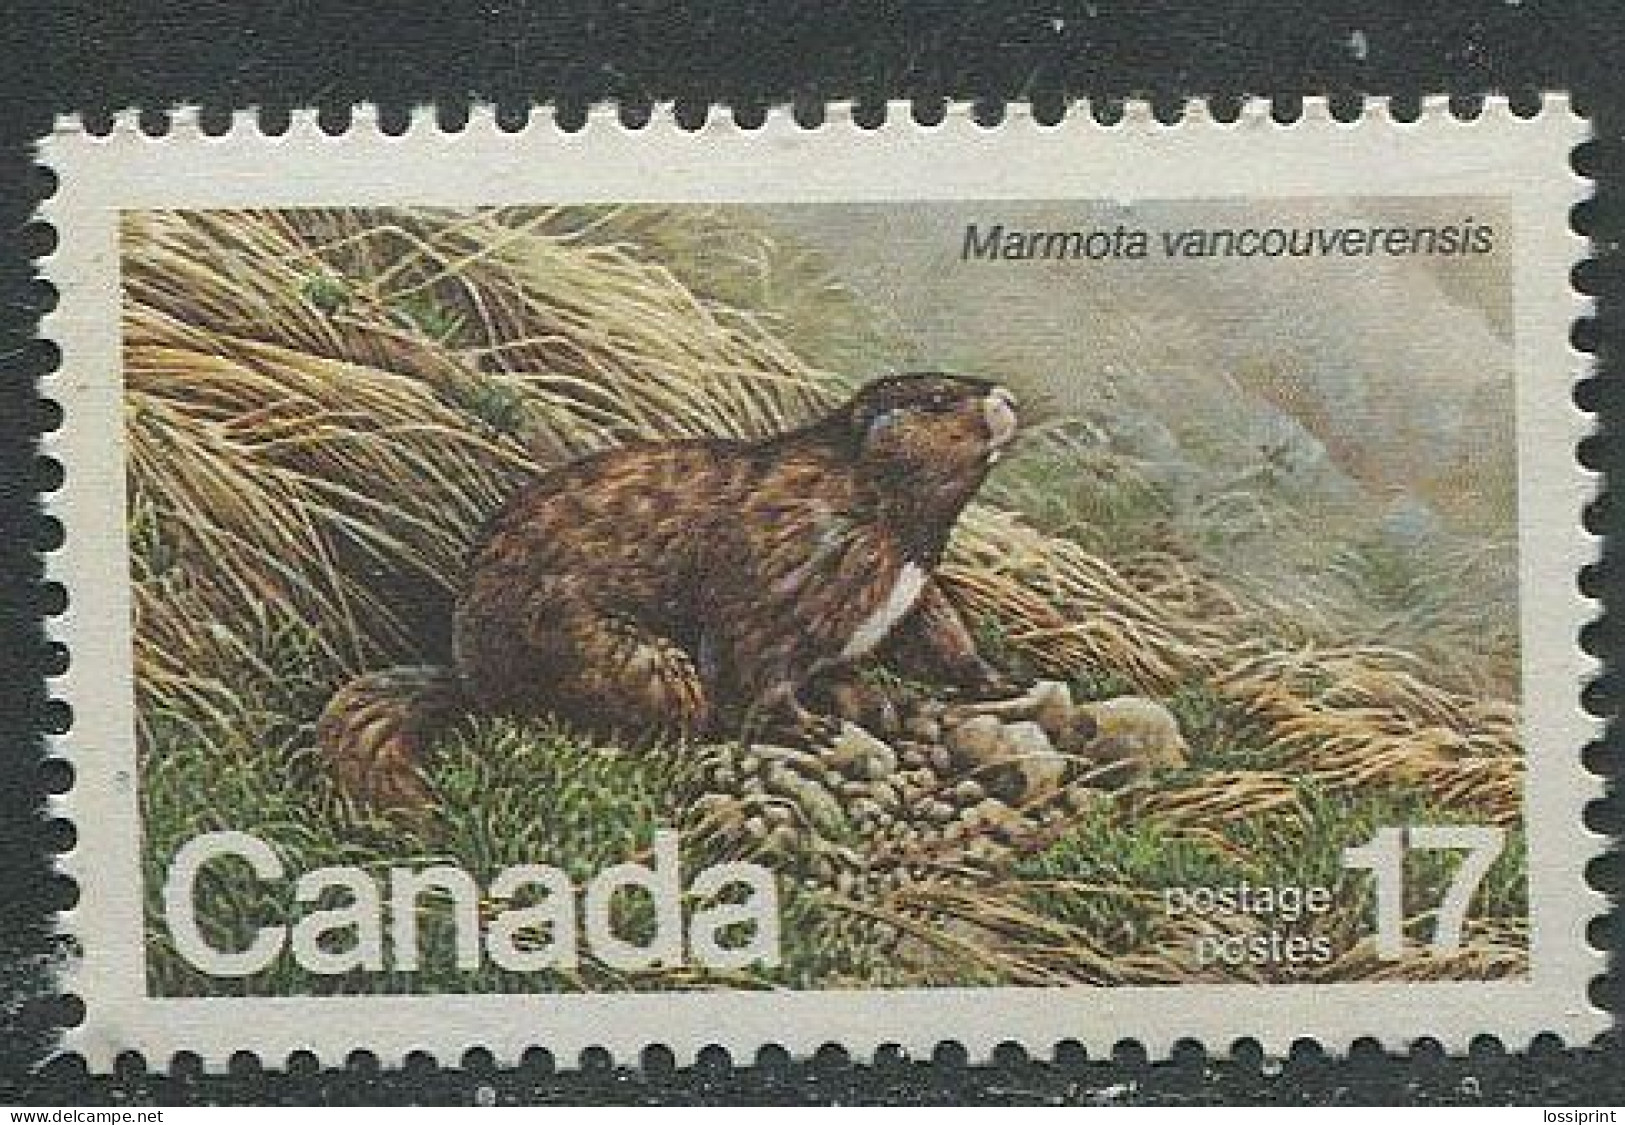 Canada:Unused Stamp Vancouver Island Marmot, 1981, MNH - Nager